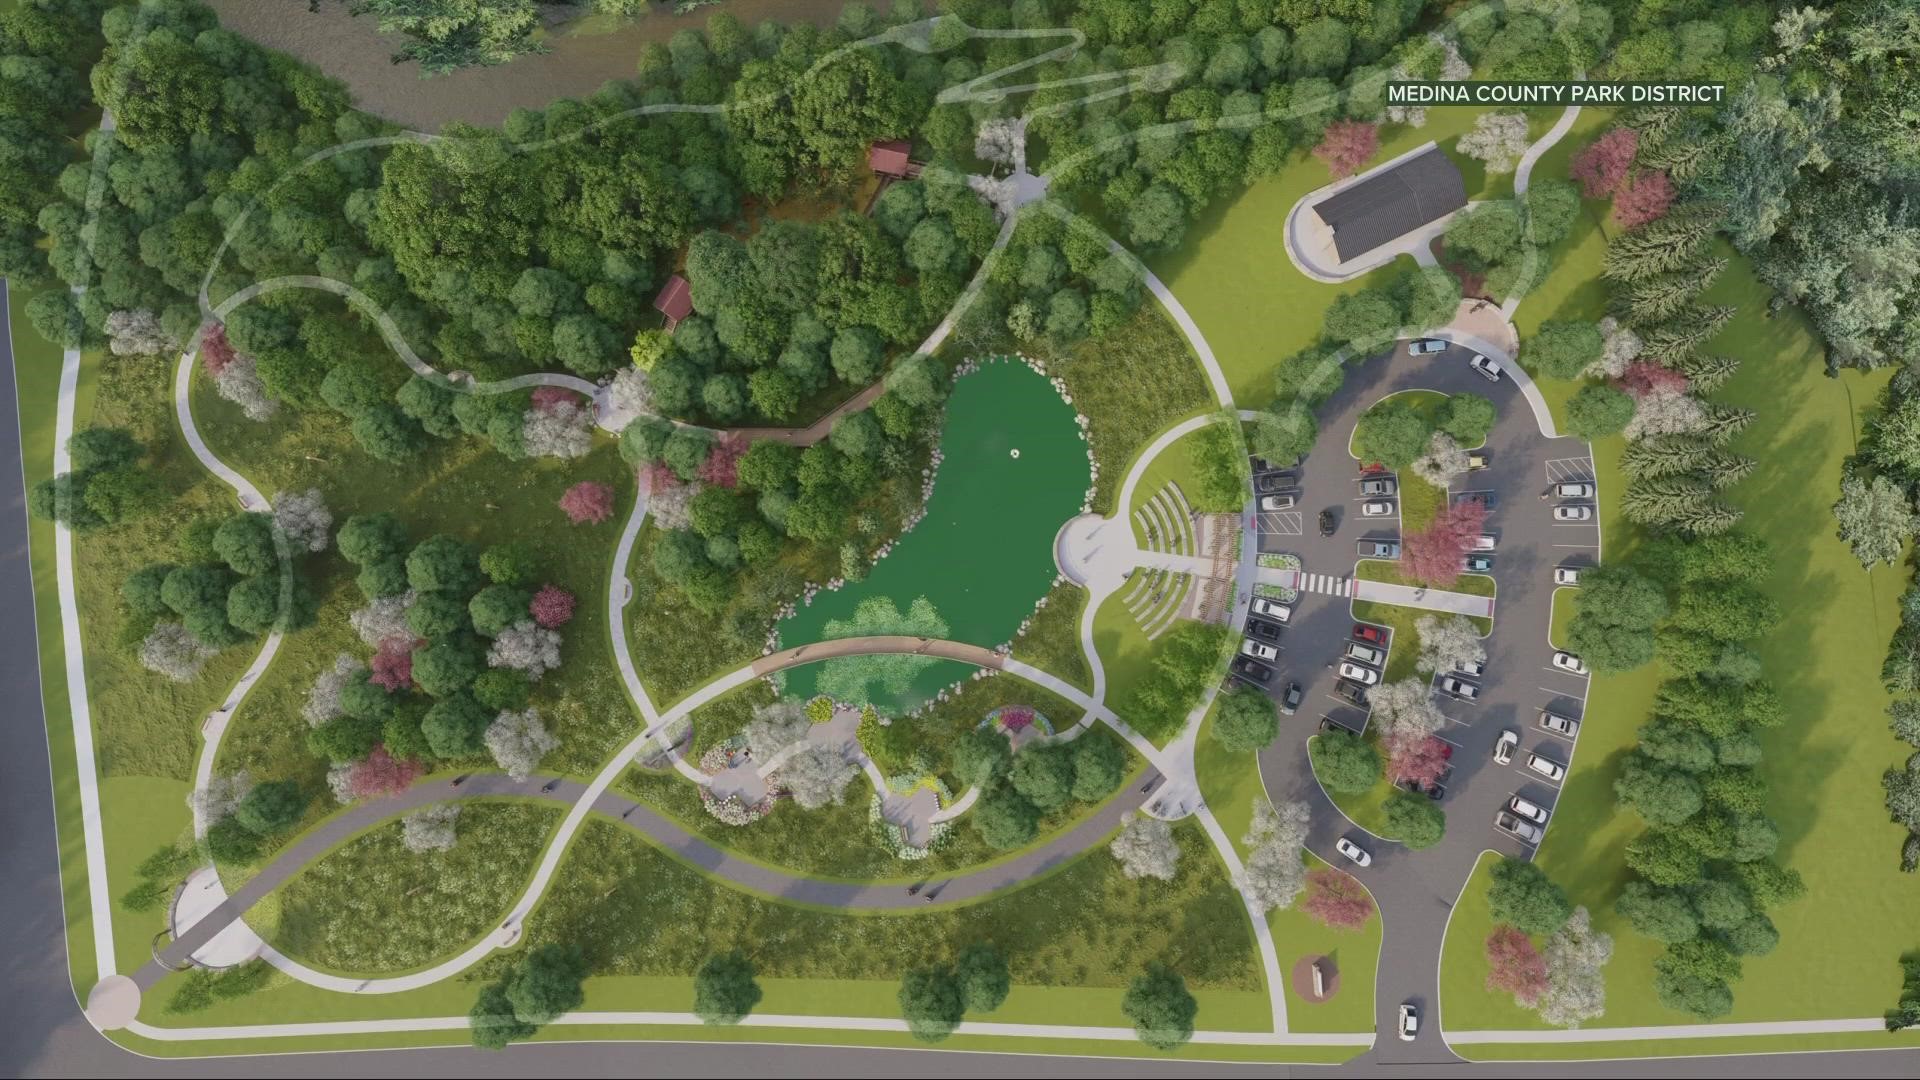 The Medina County Park District revealed plans for expansion in the area. Construction is set to begin in 2025.